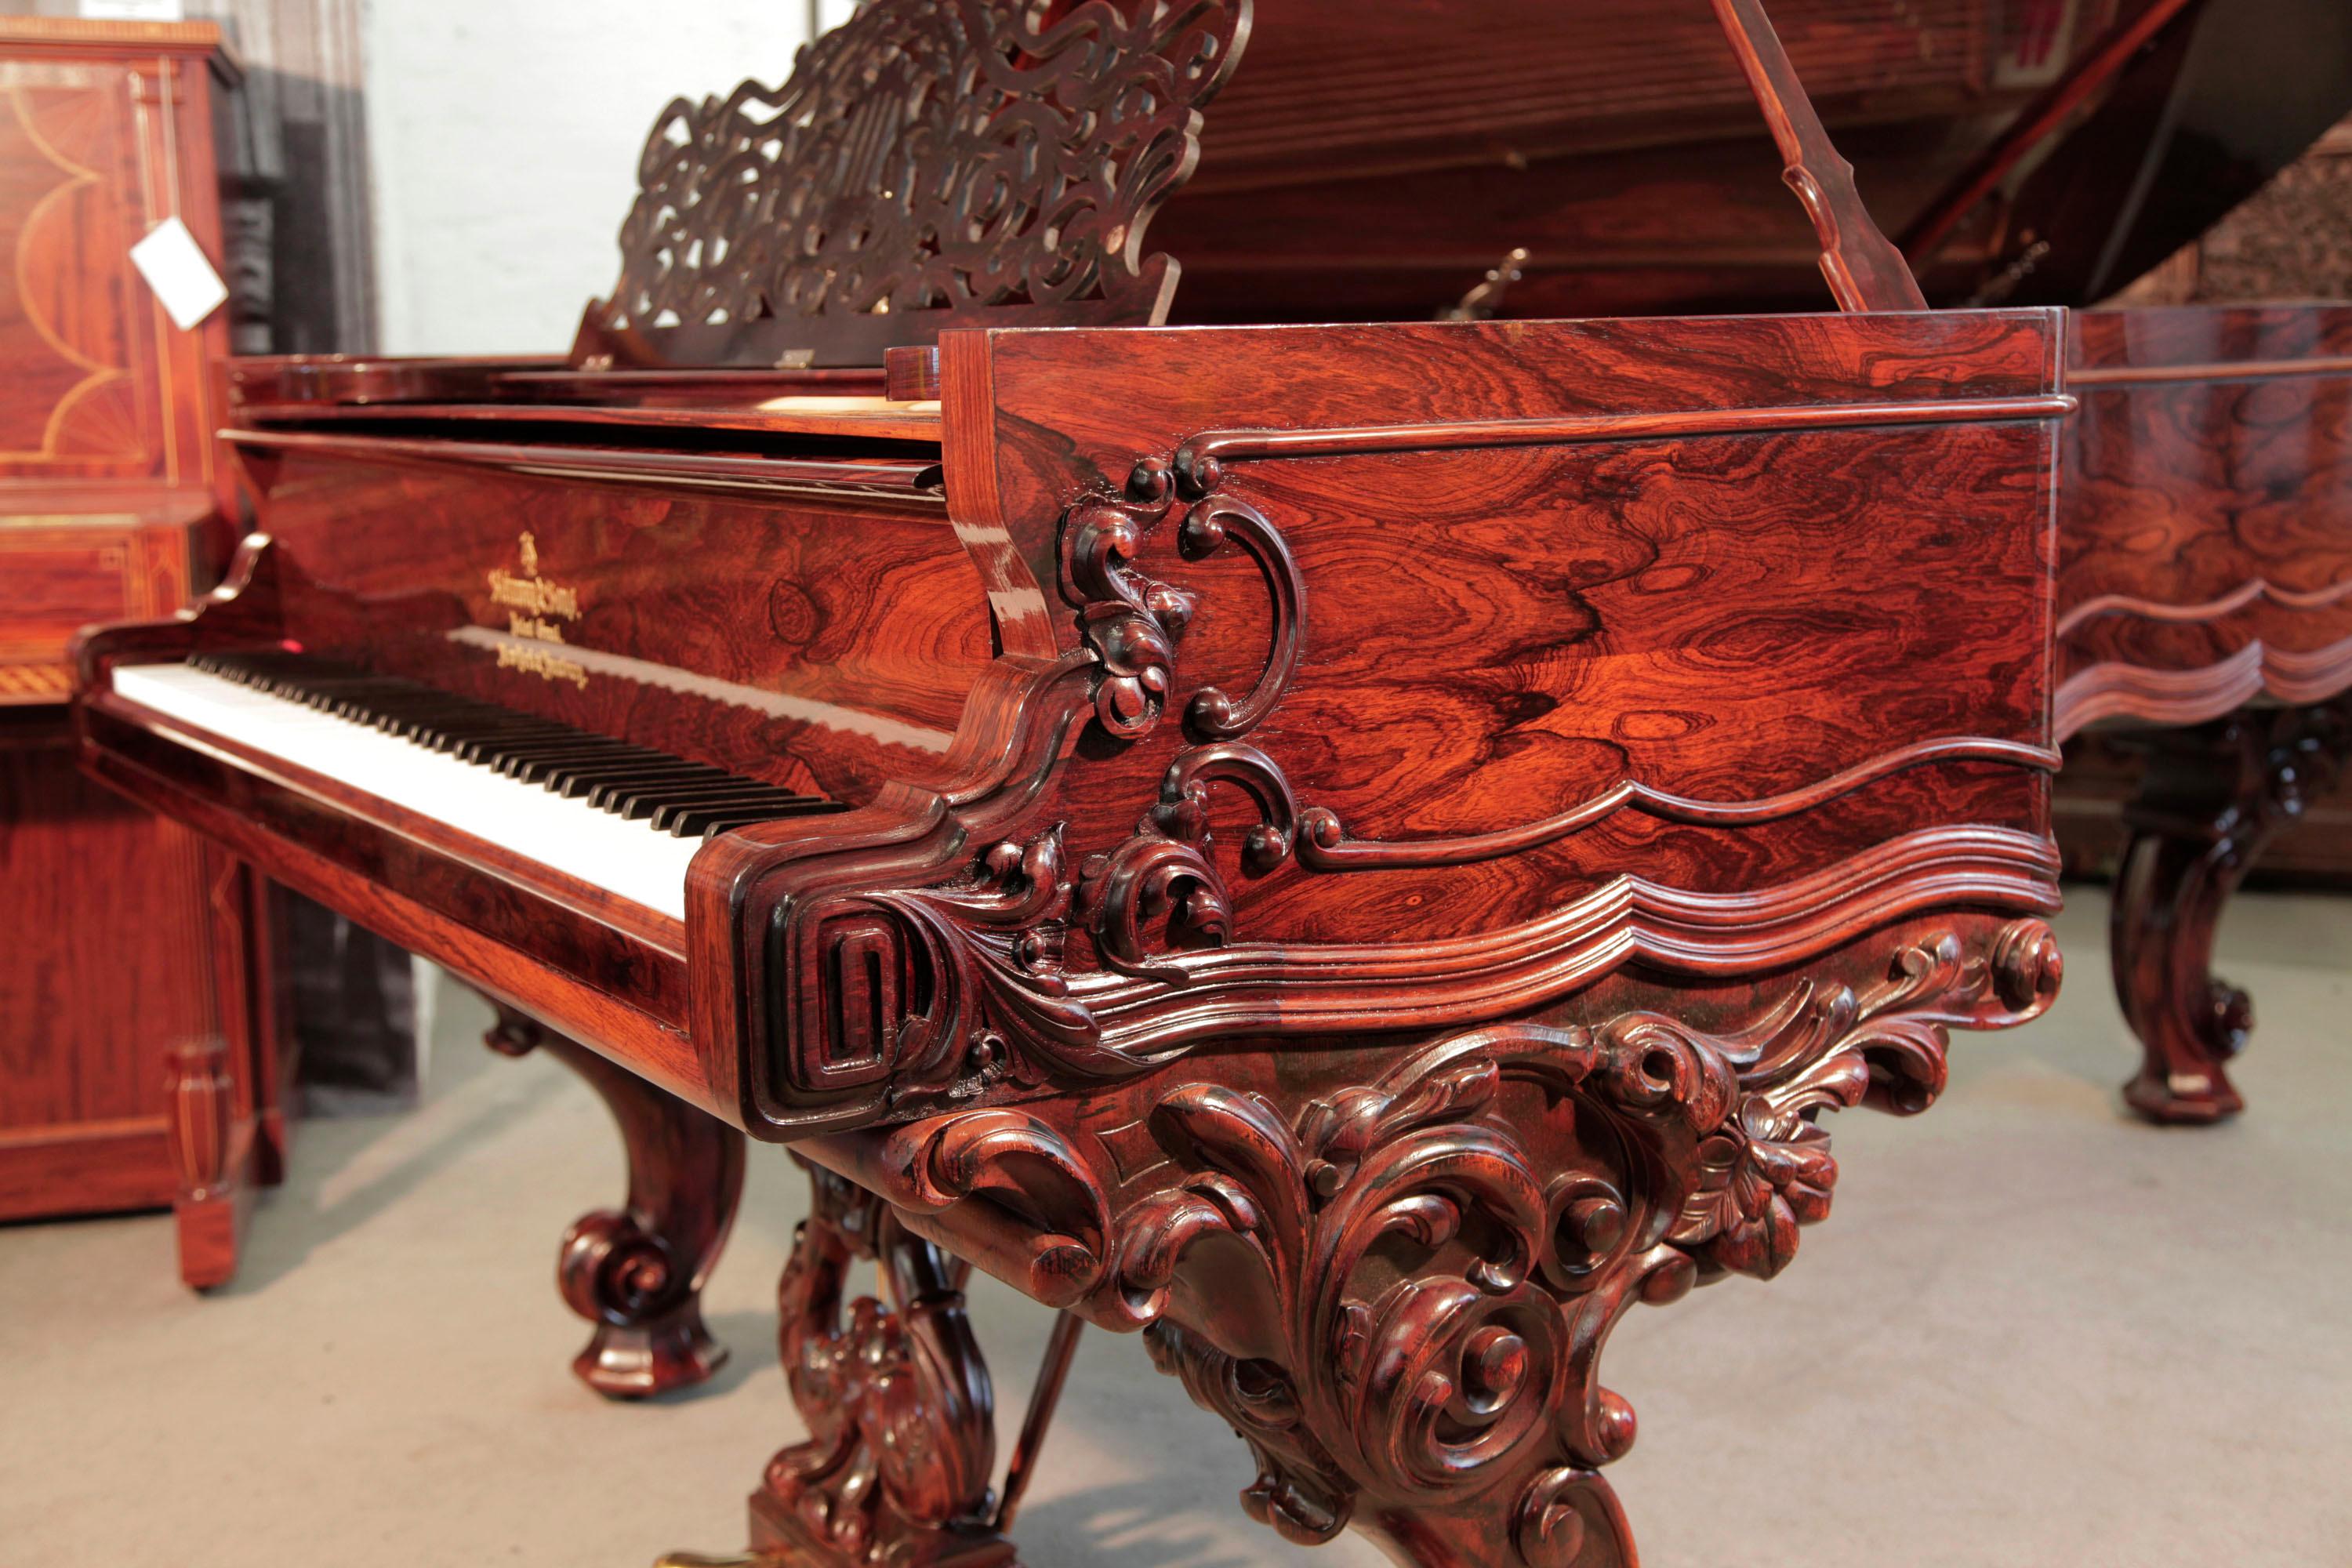 Rococo style, 1874, Steinway & Sons Centennial concert grand piano with a rosewood case, filigree music desk and ornately carved, reverse scroll legs. Piano is rebuilt.

The piano cheek features a carved, Classical meander and acanthus in high